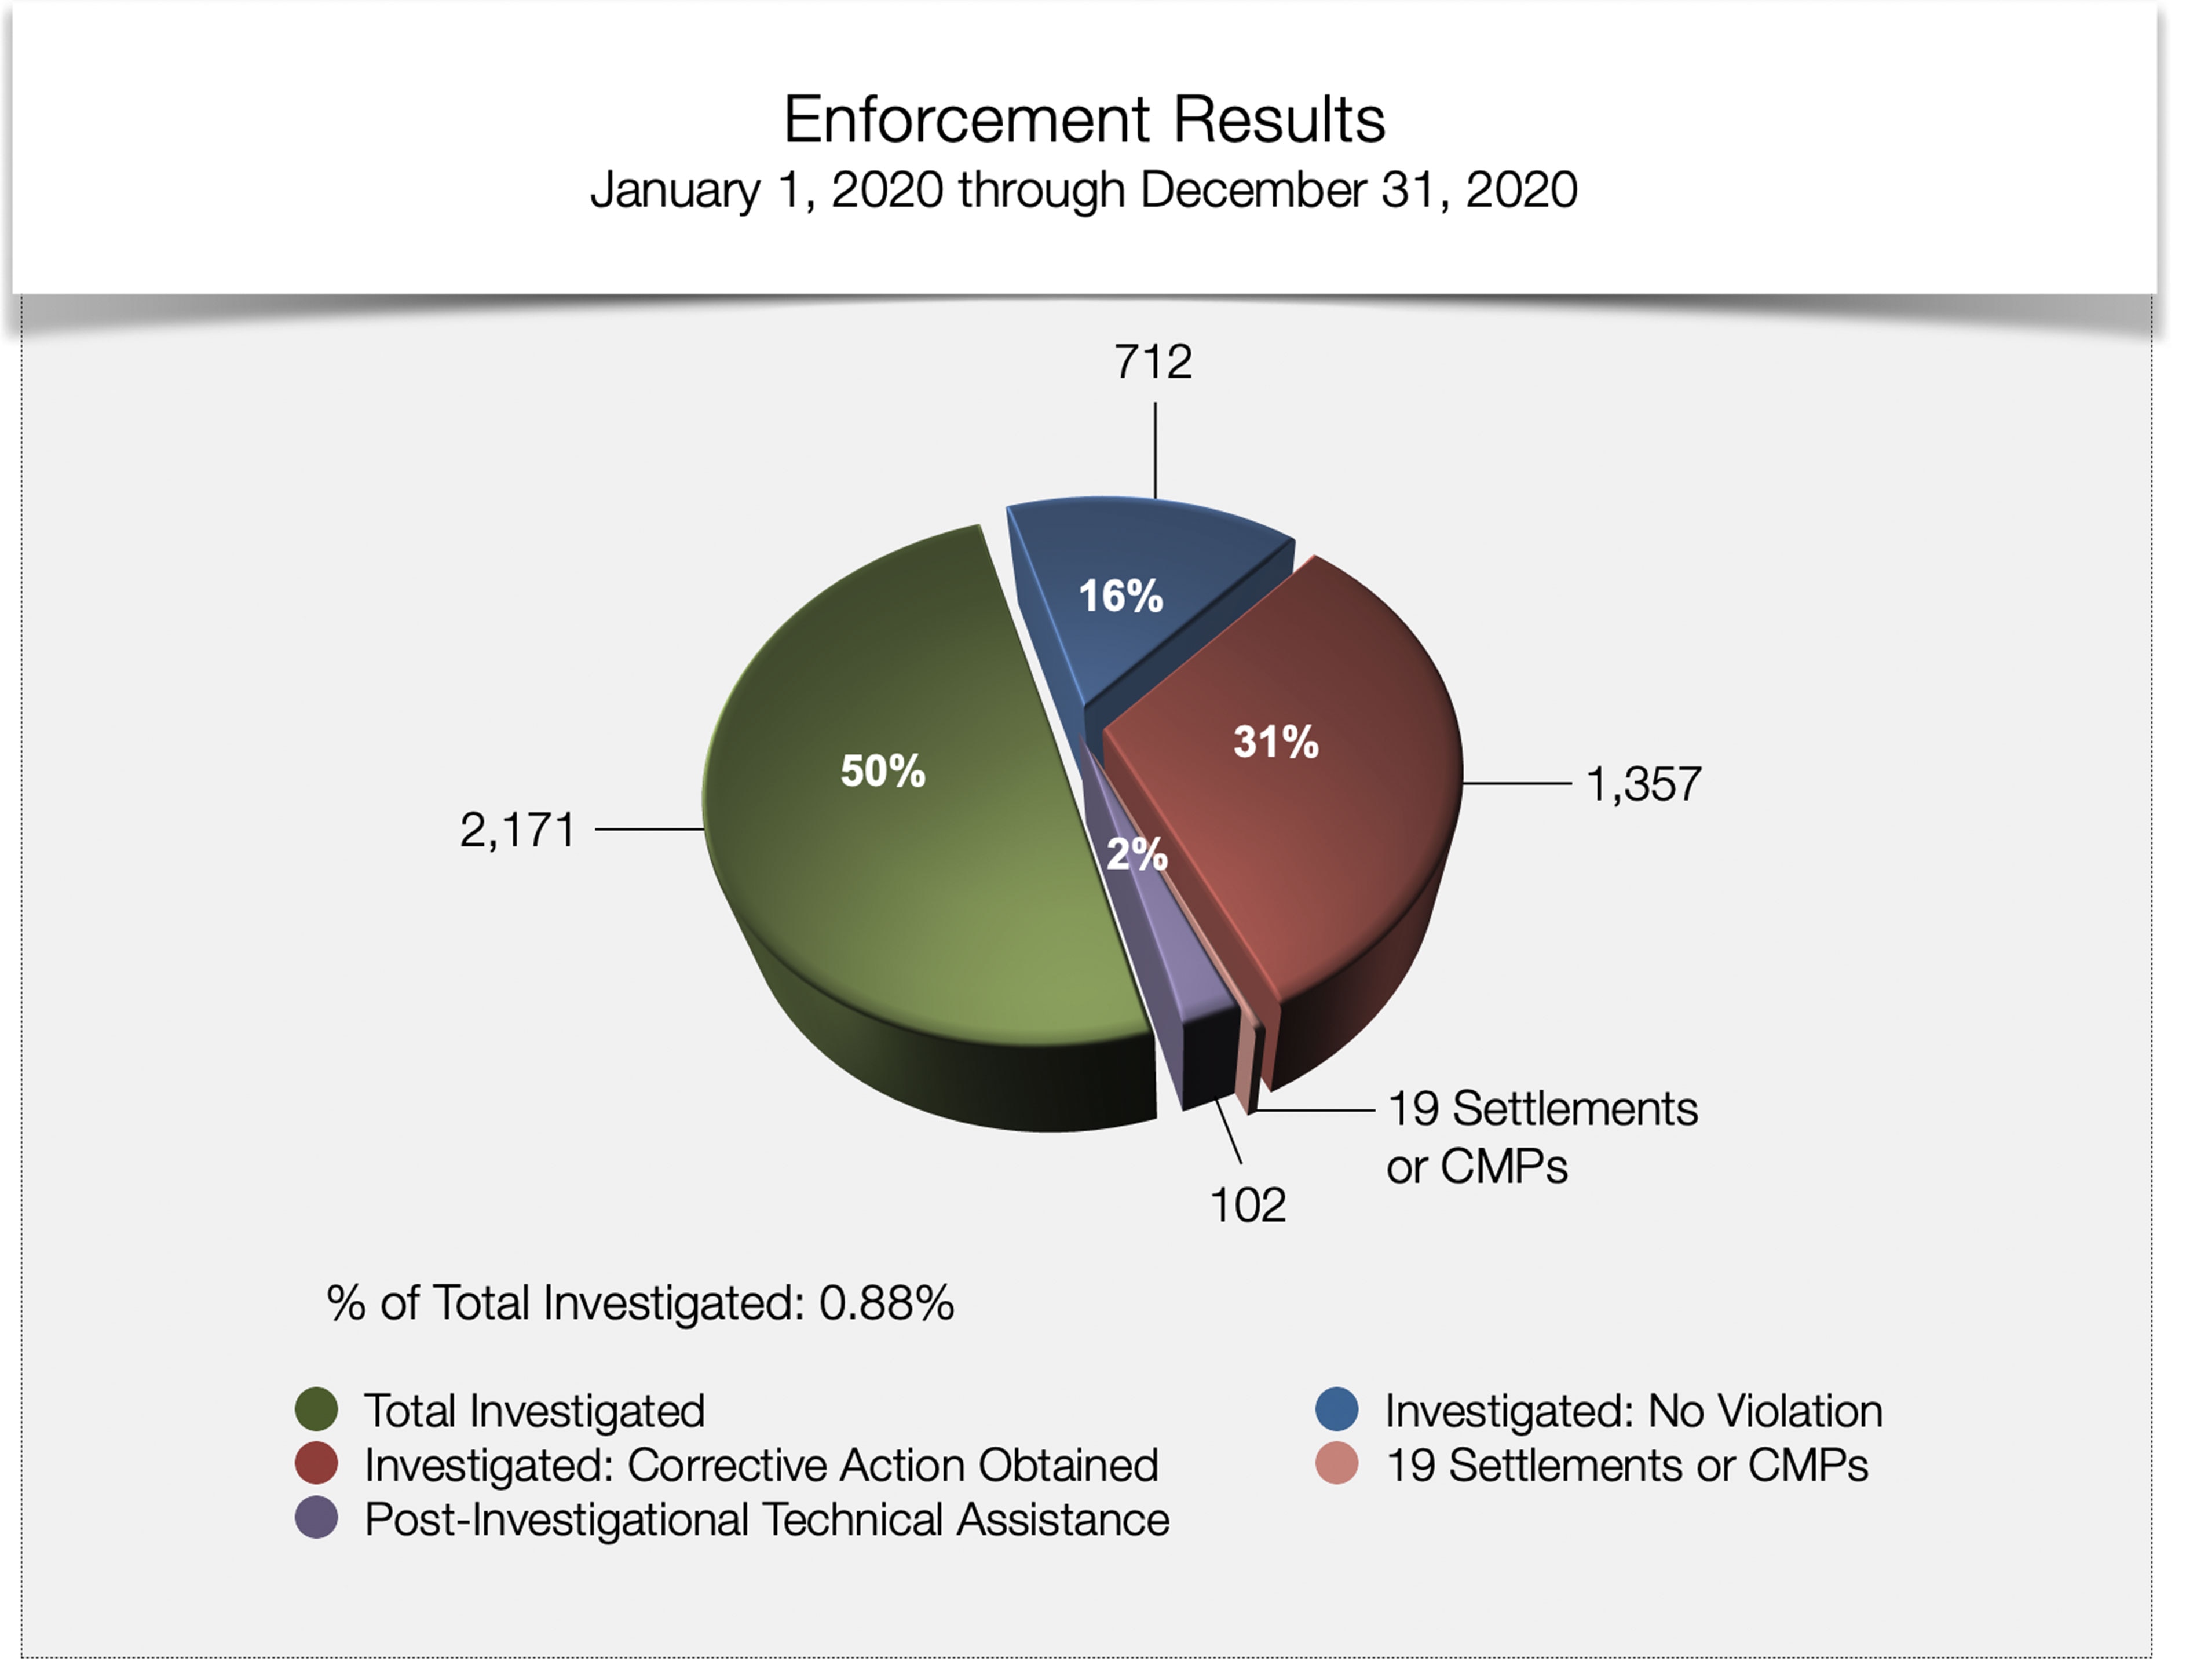 Enforcement Results - January 1, 2020 through December 31, 2020